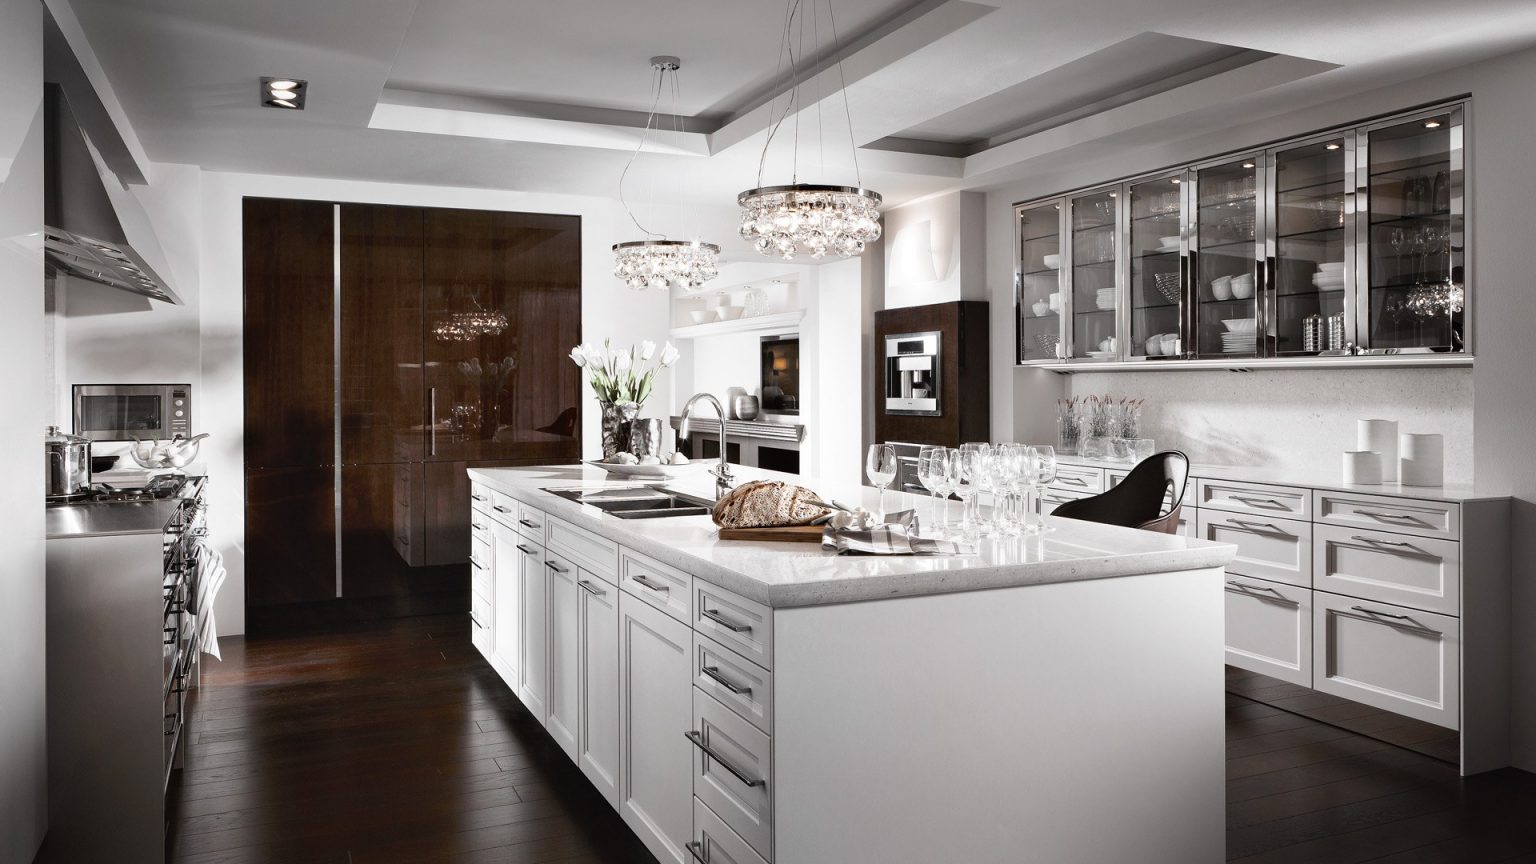 Grundig KTCHN How To Make Your Kitchen Look More Expensive Than It Really Is Leicht 1536x864 